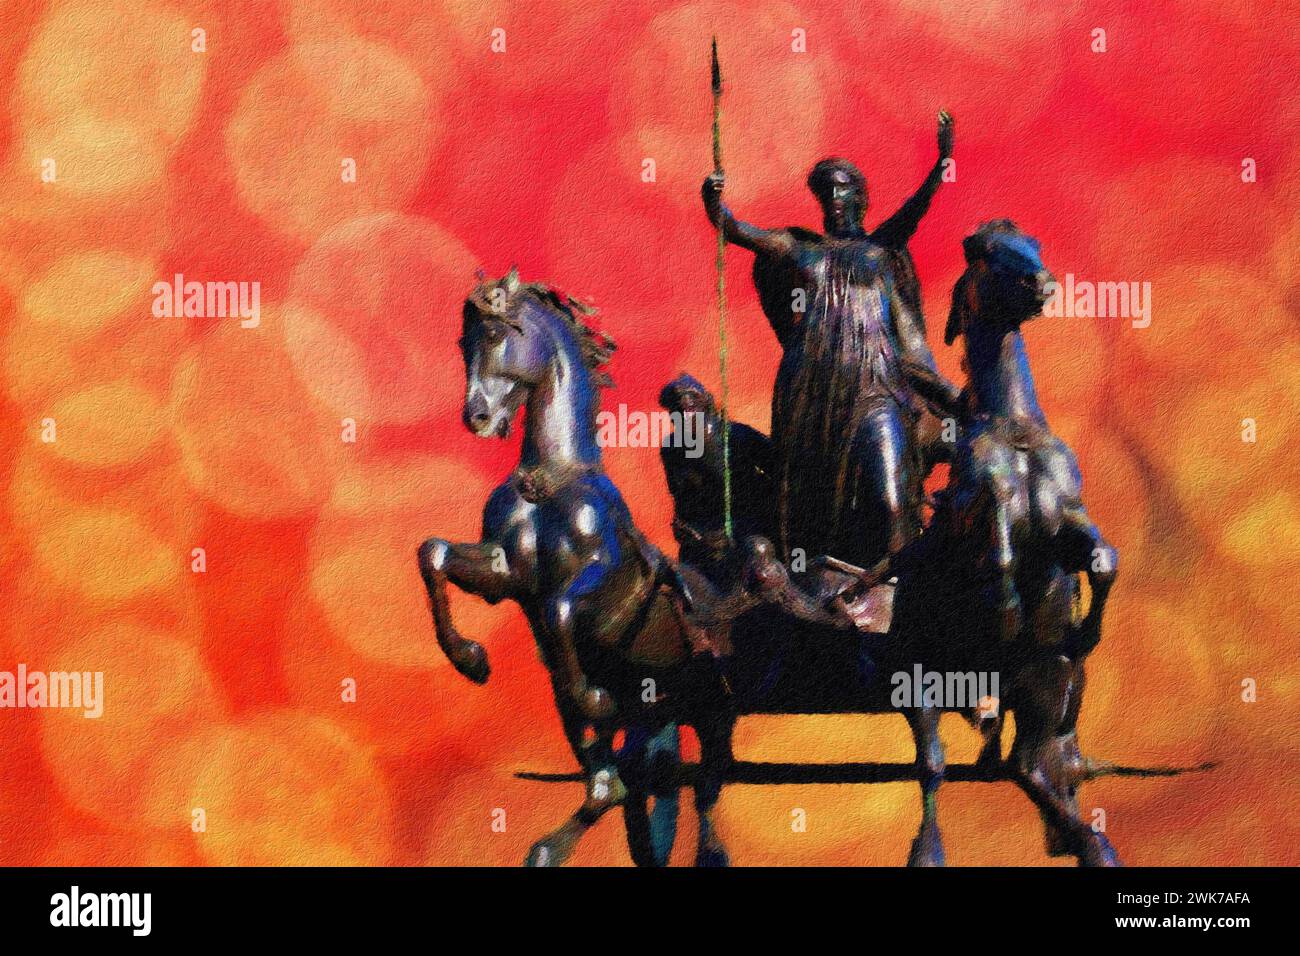 Statue of Queen Boadicea with spear and chariot, Westminster Bridge, Westminster, London, England. Stock Photo